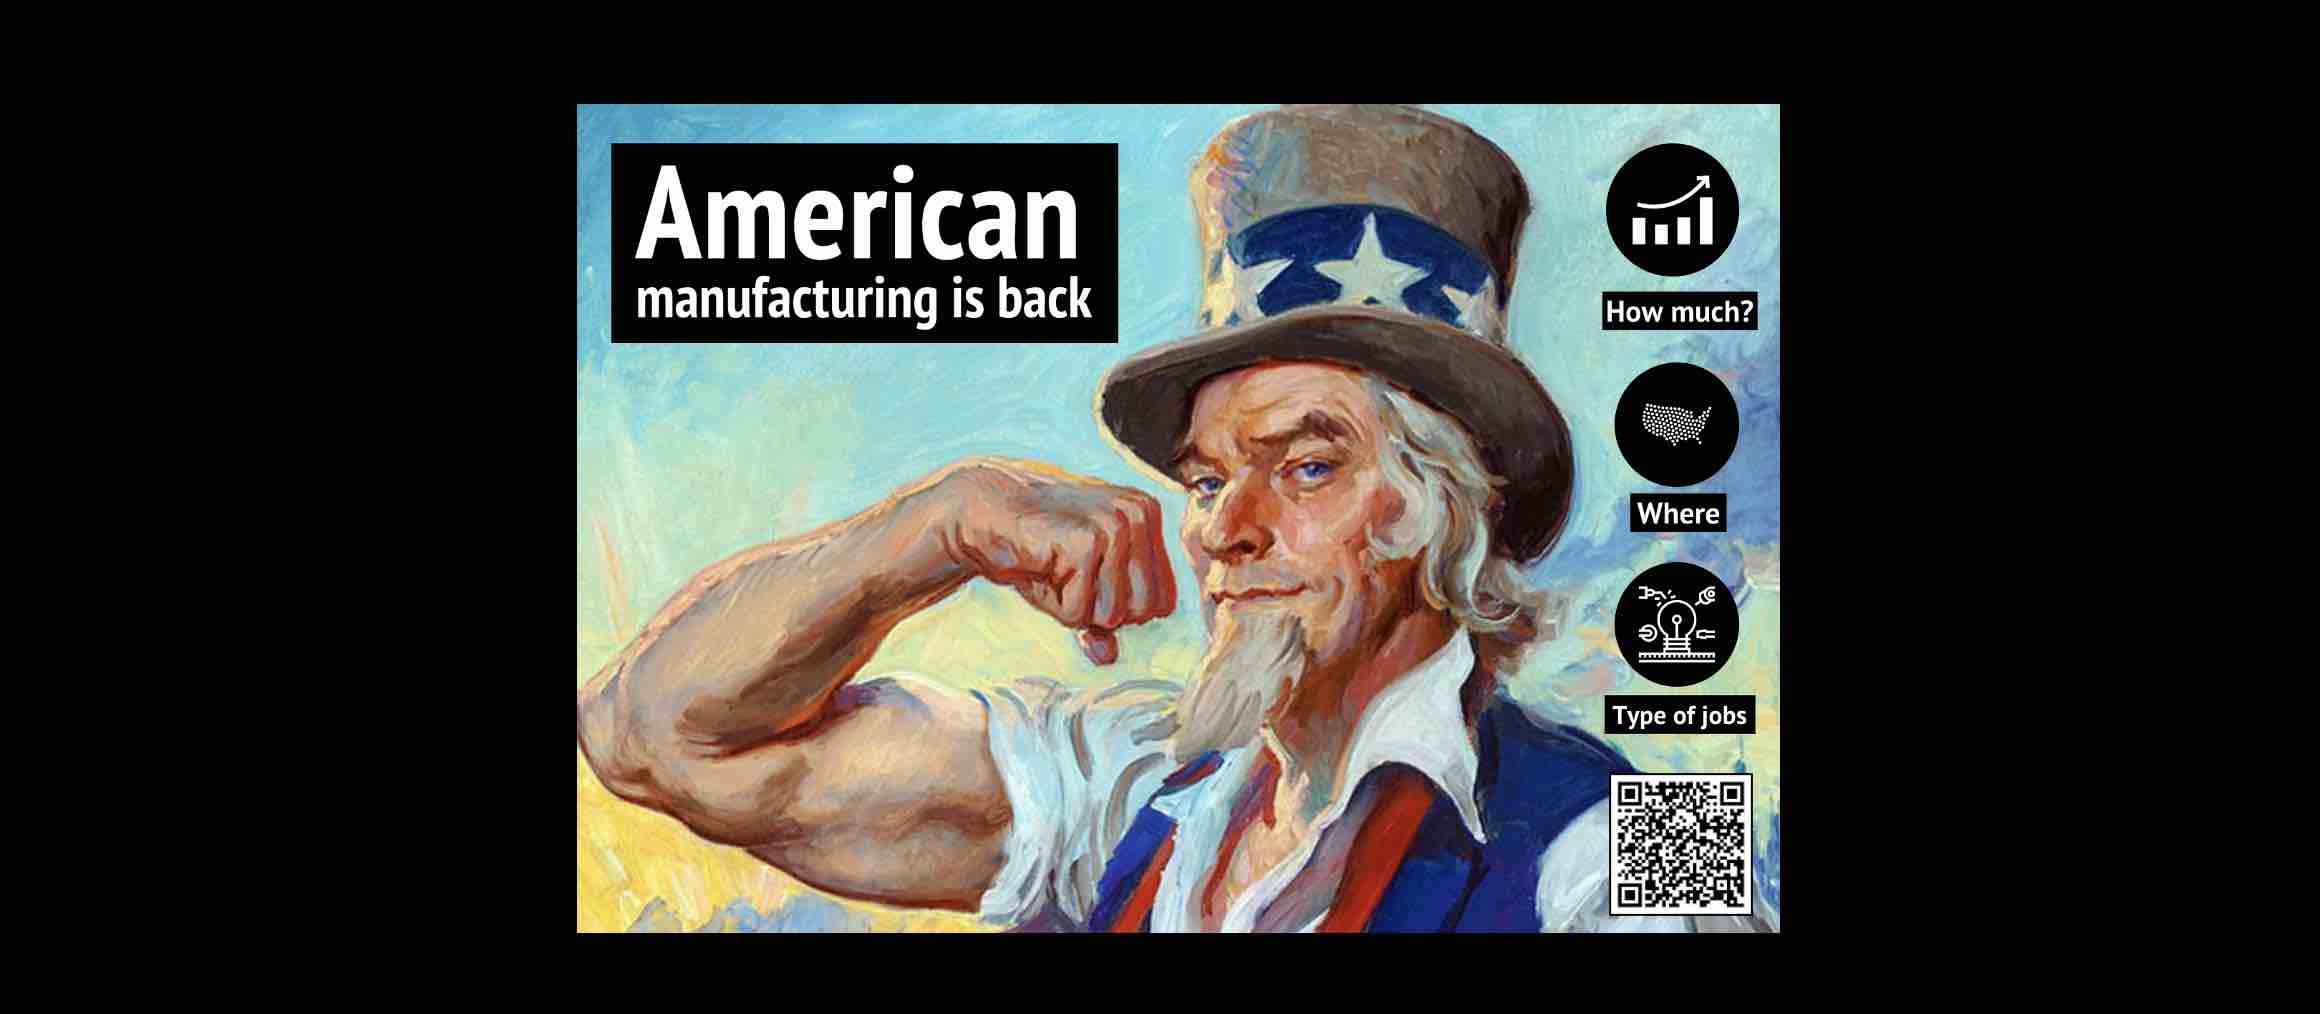 American Manufacturing in back and creating thousands of well paying jobs